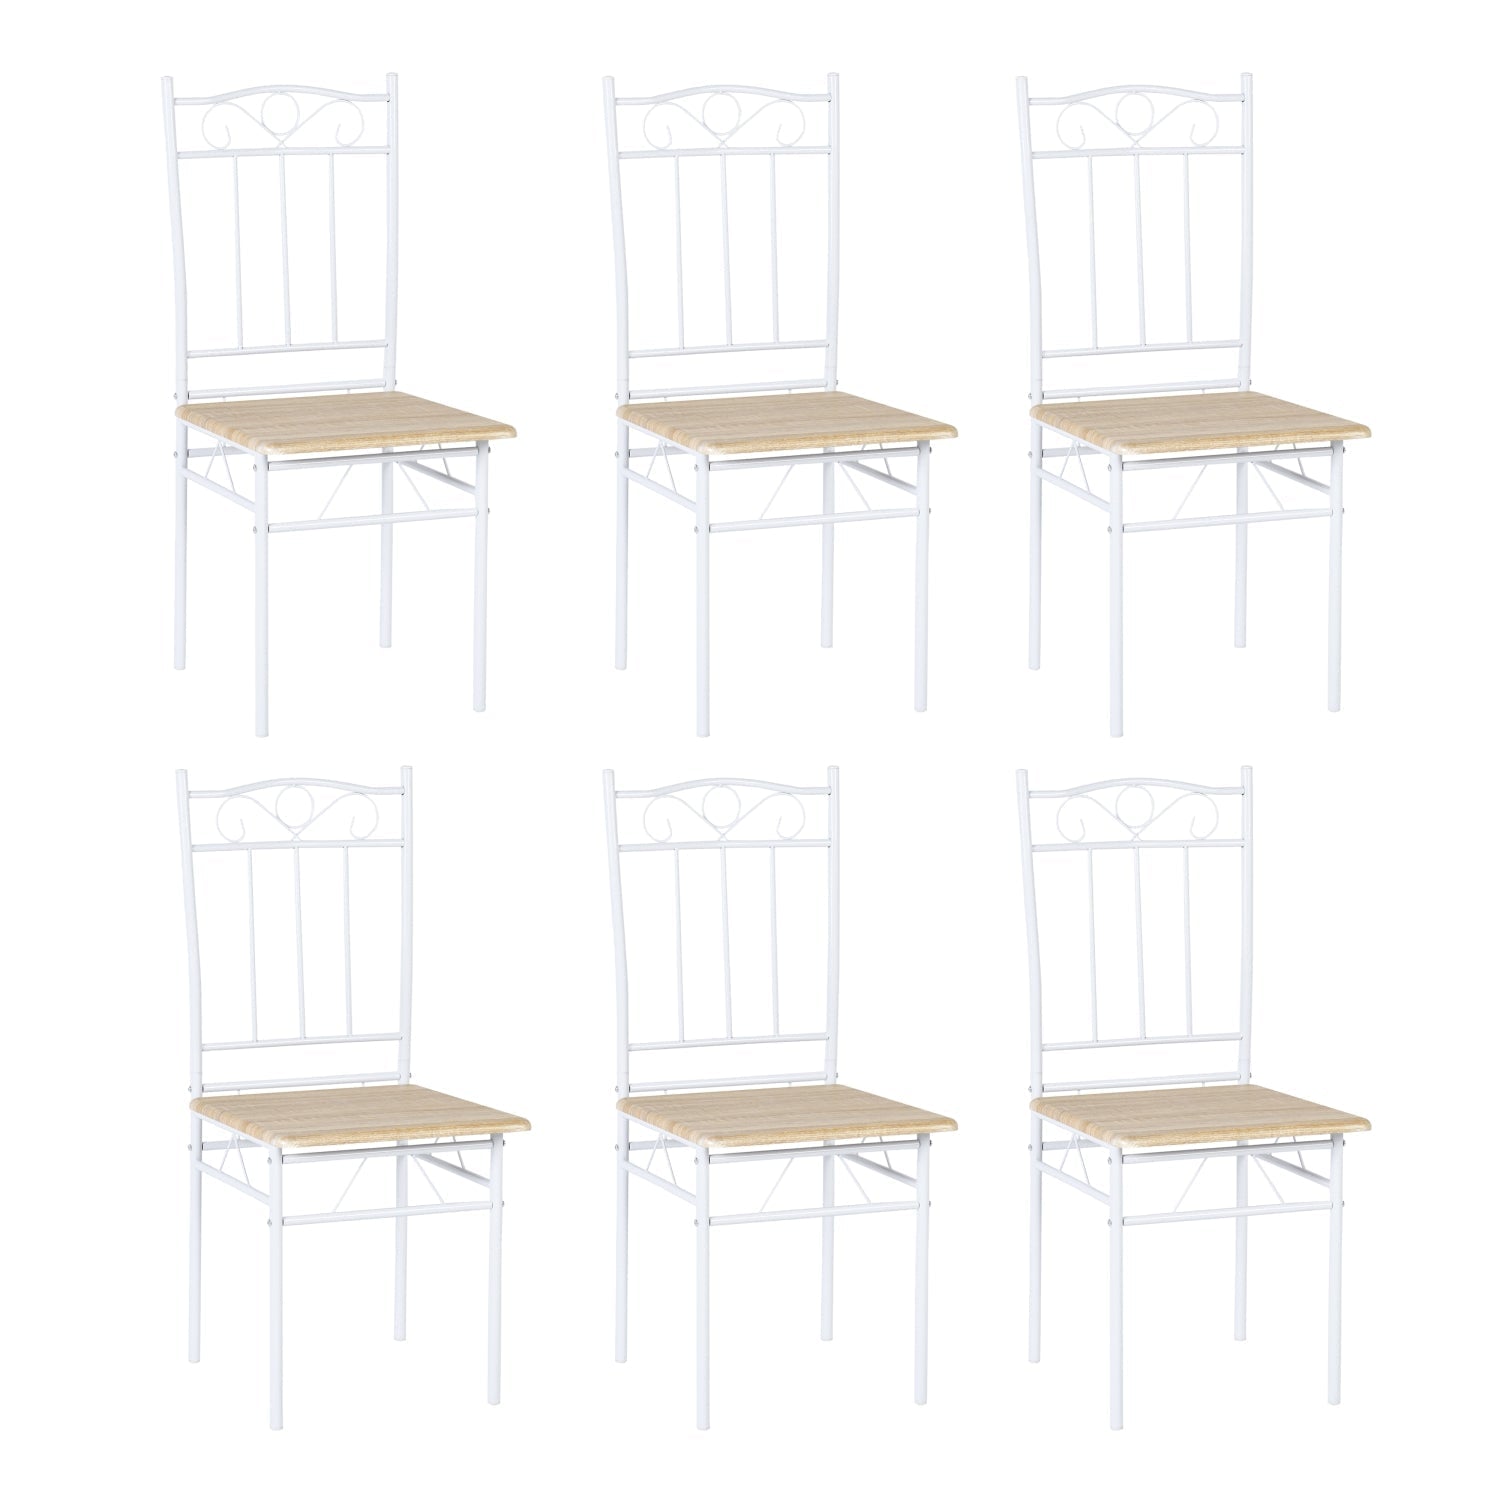 NORSEMAN BEECH Dining Table with 4/6 Chairs - 137*77*75cm - Oak Grain & White Iron Tubing